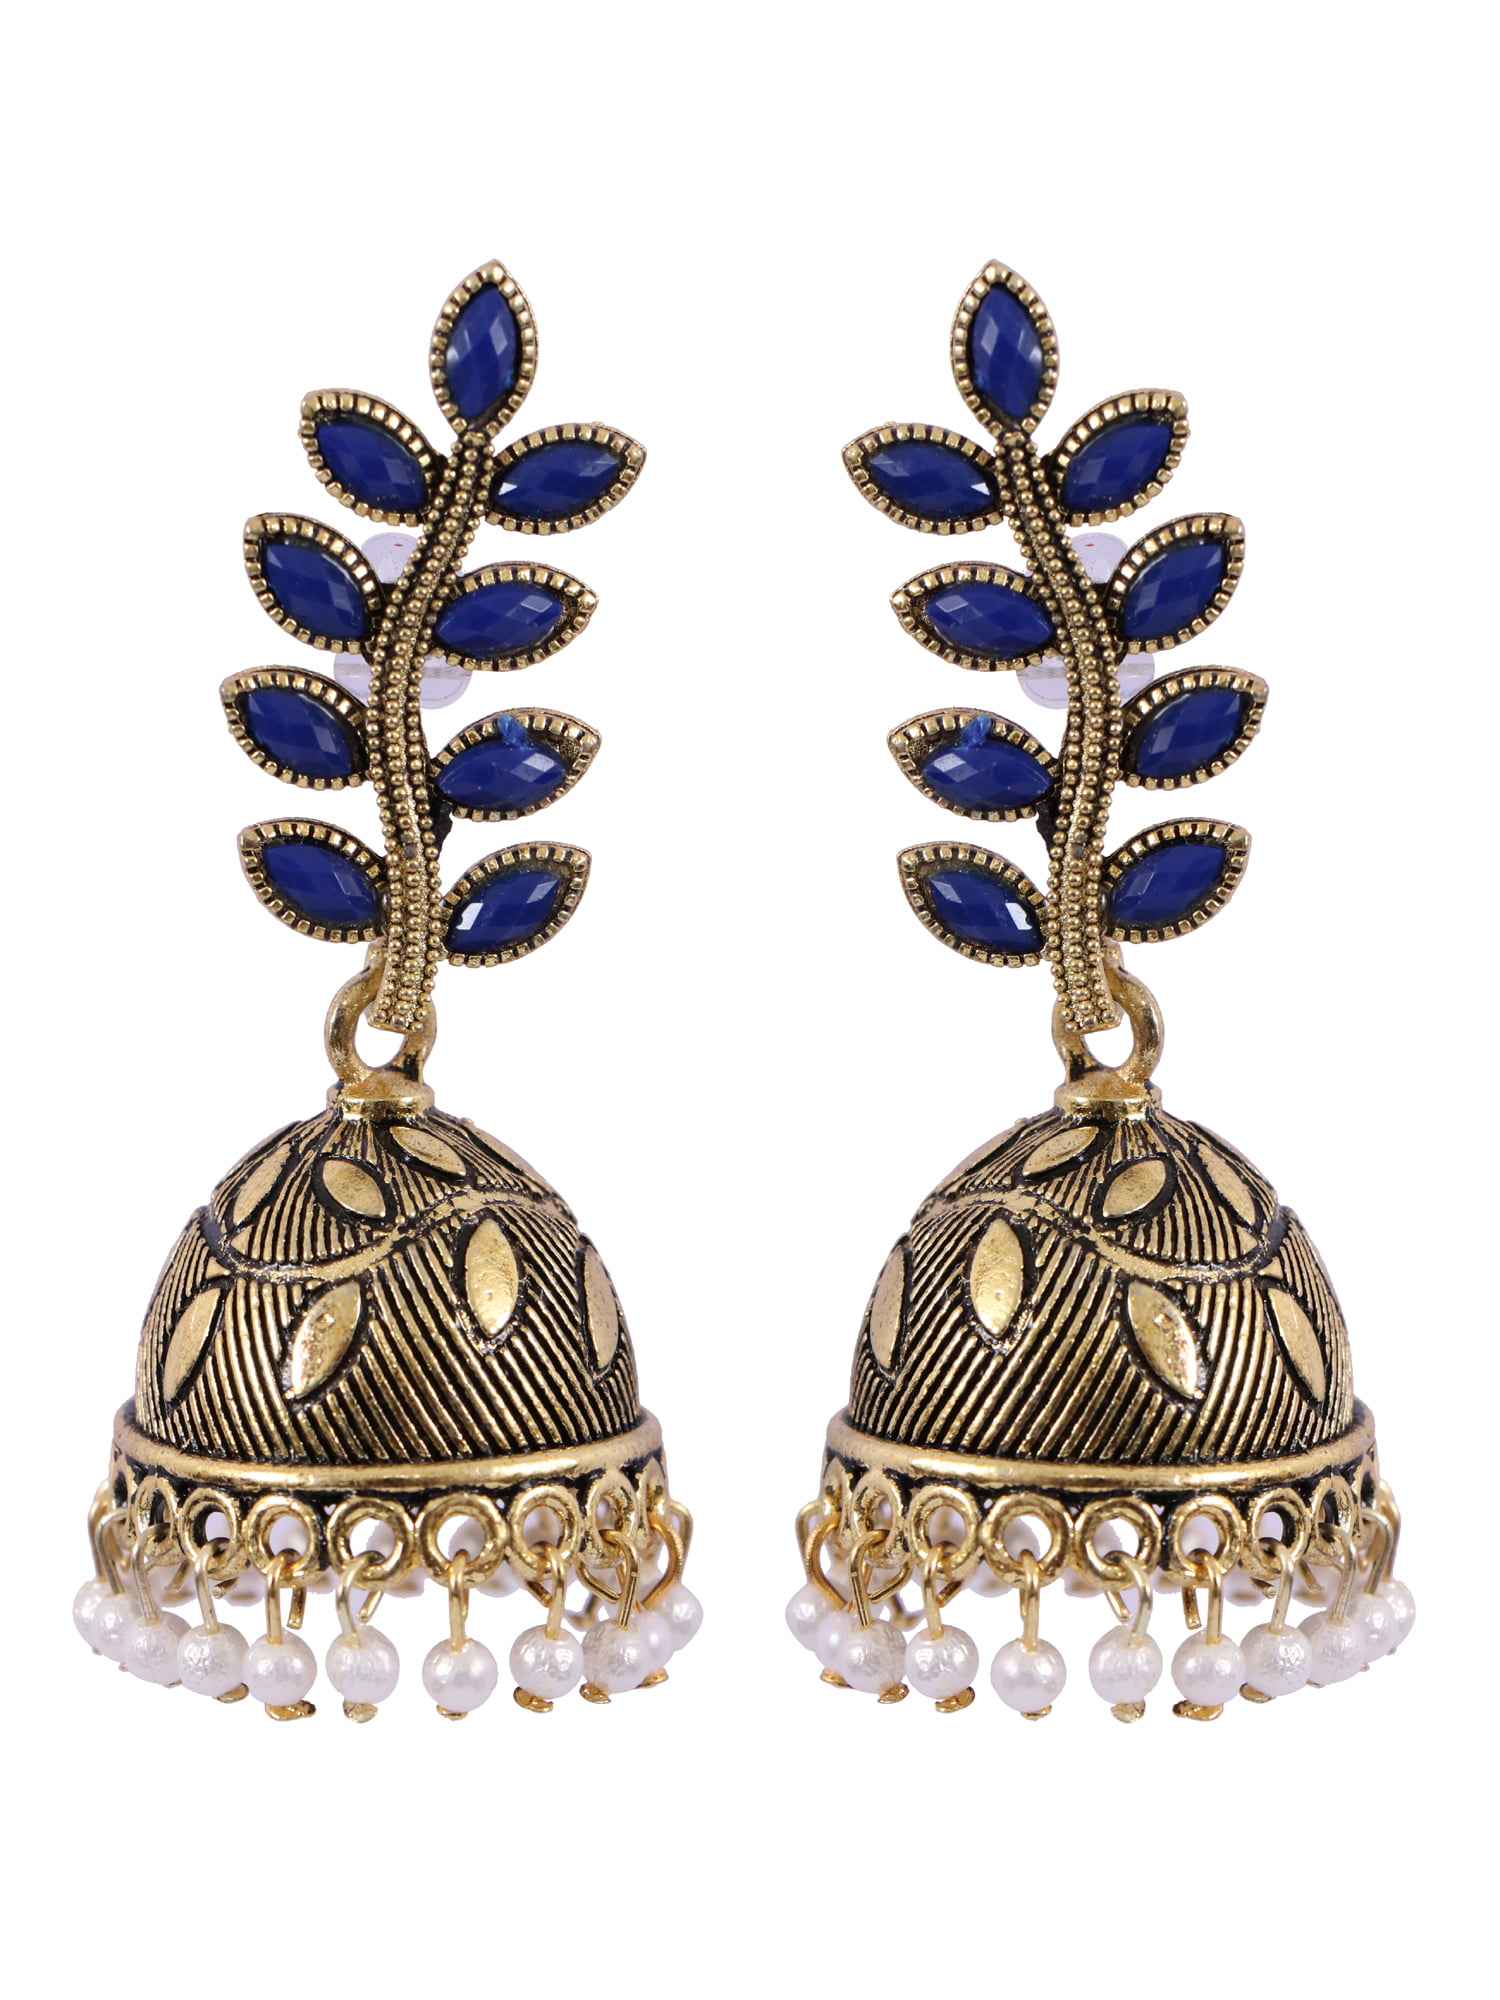 Details more than 246 earrings for women indian